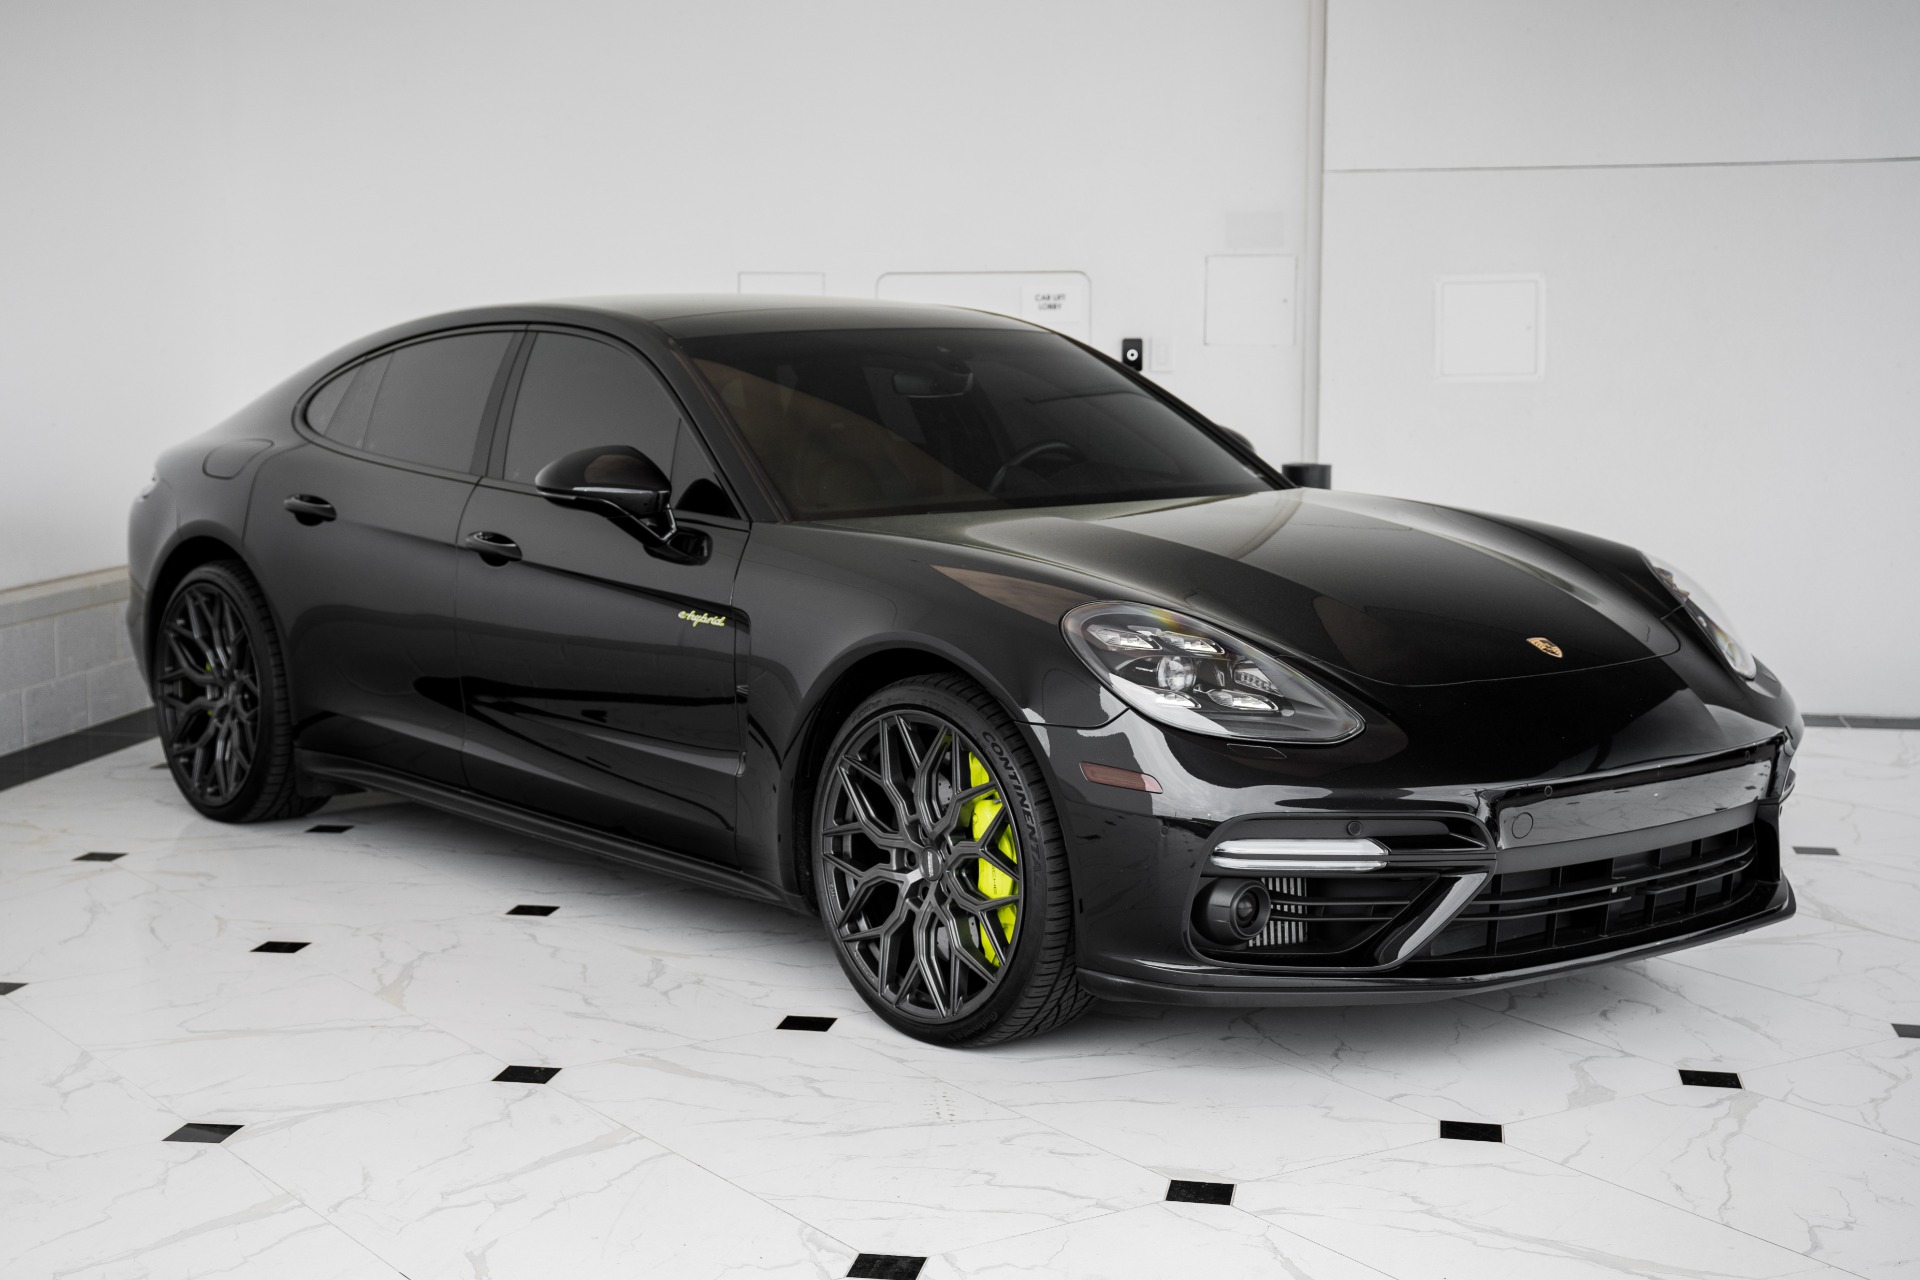 Used 2019 Porsche Panamera E-Hybrid Turbo S For Sale ($126,695) Exclusive  Automotive Group Stock #23NV07623A